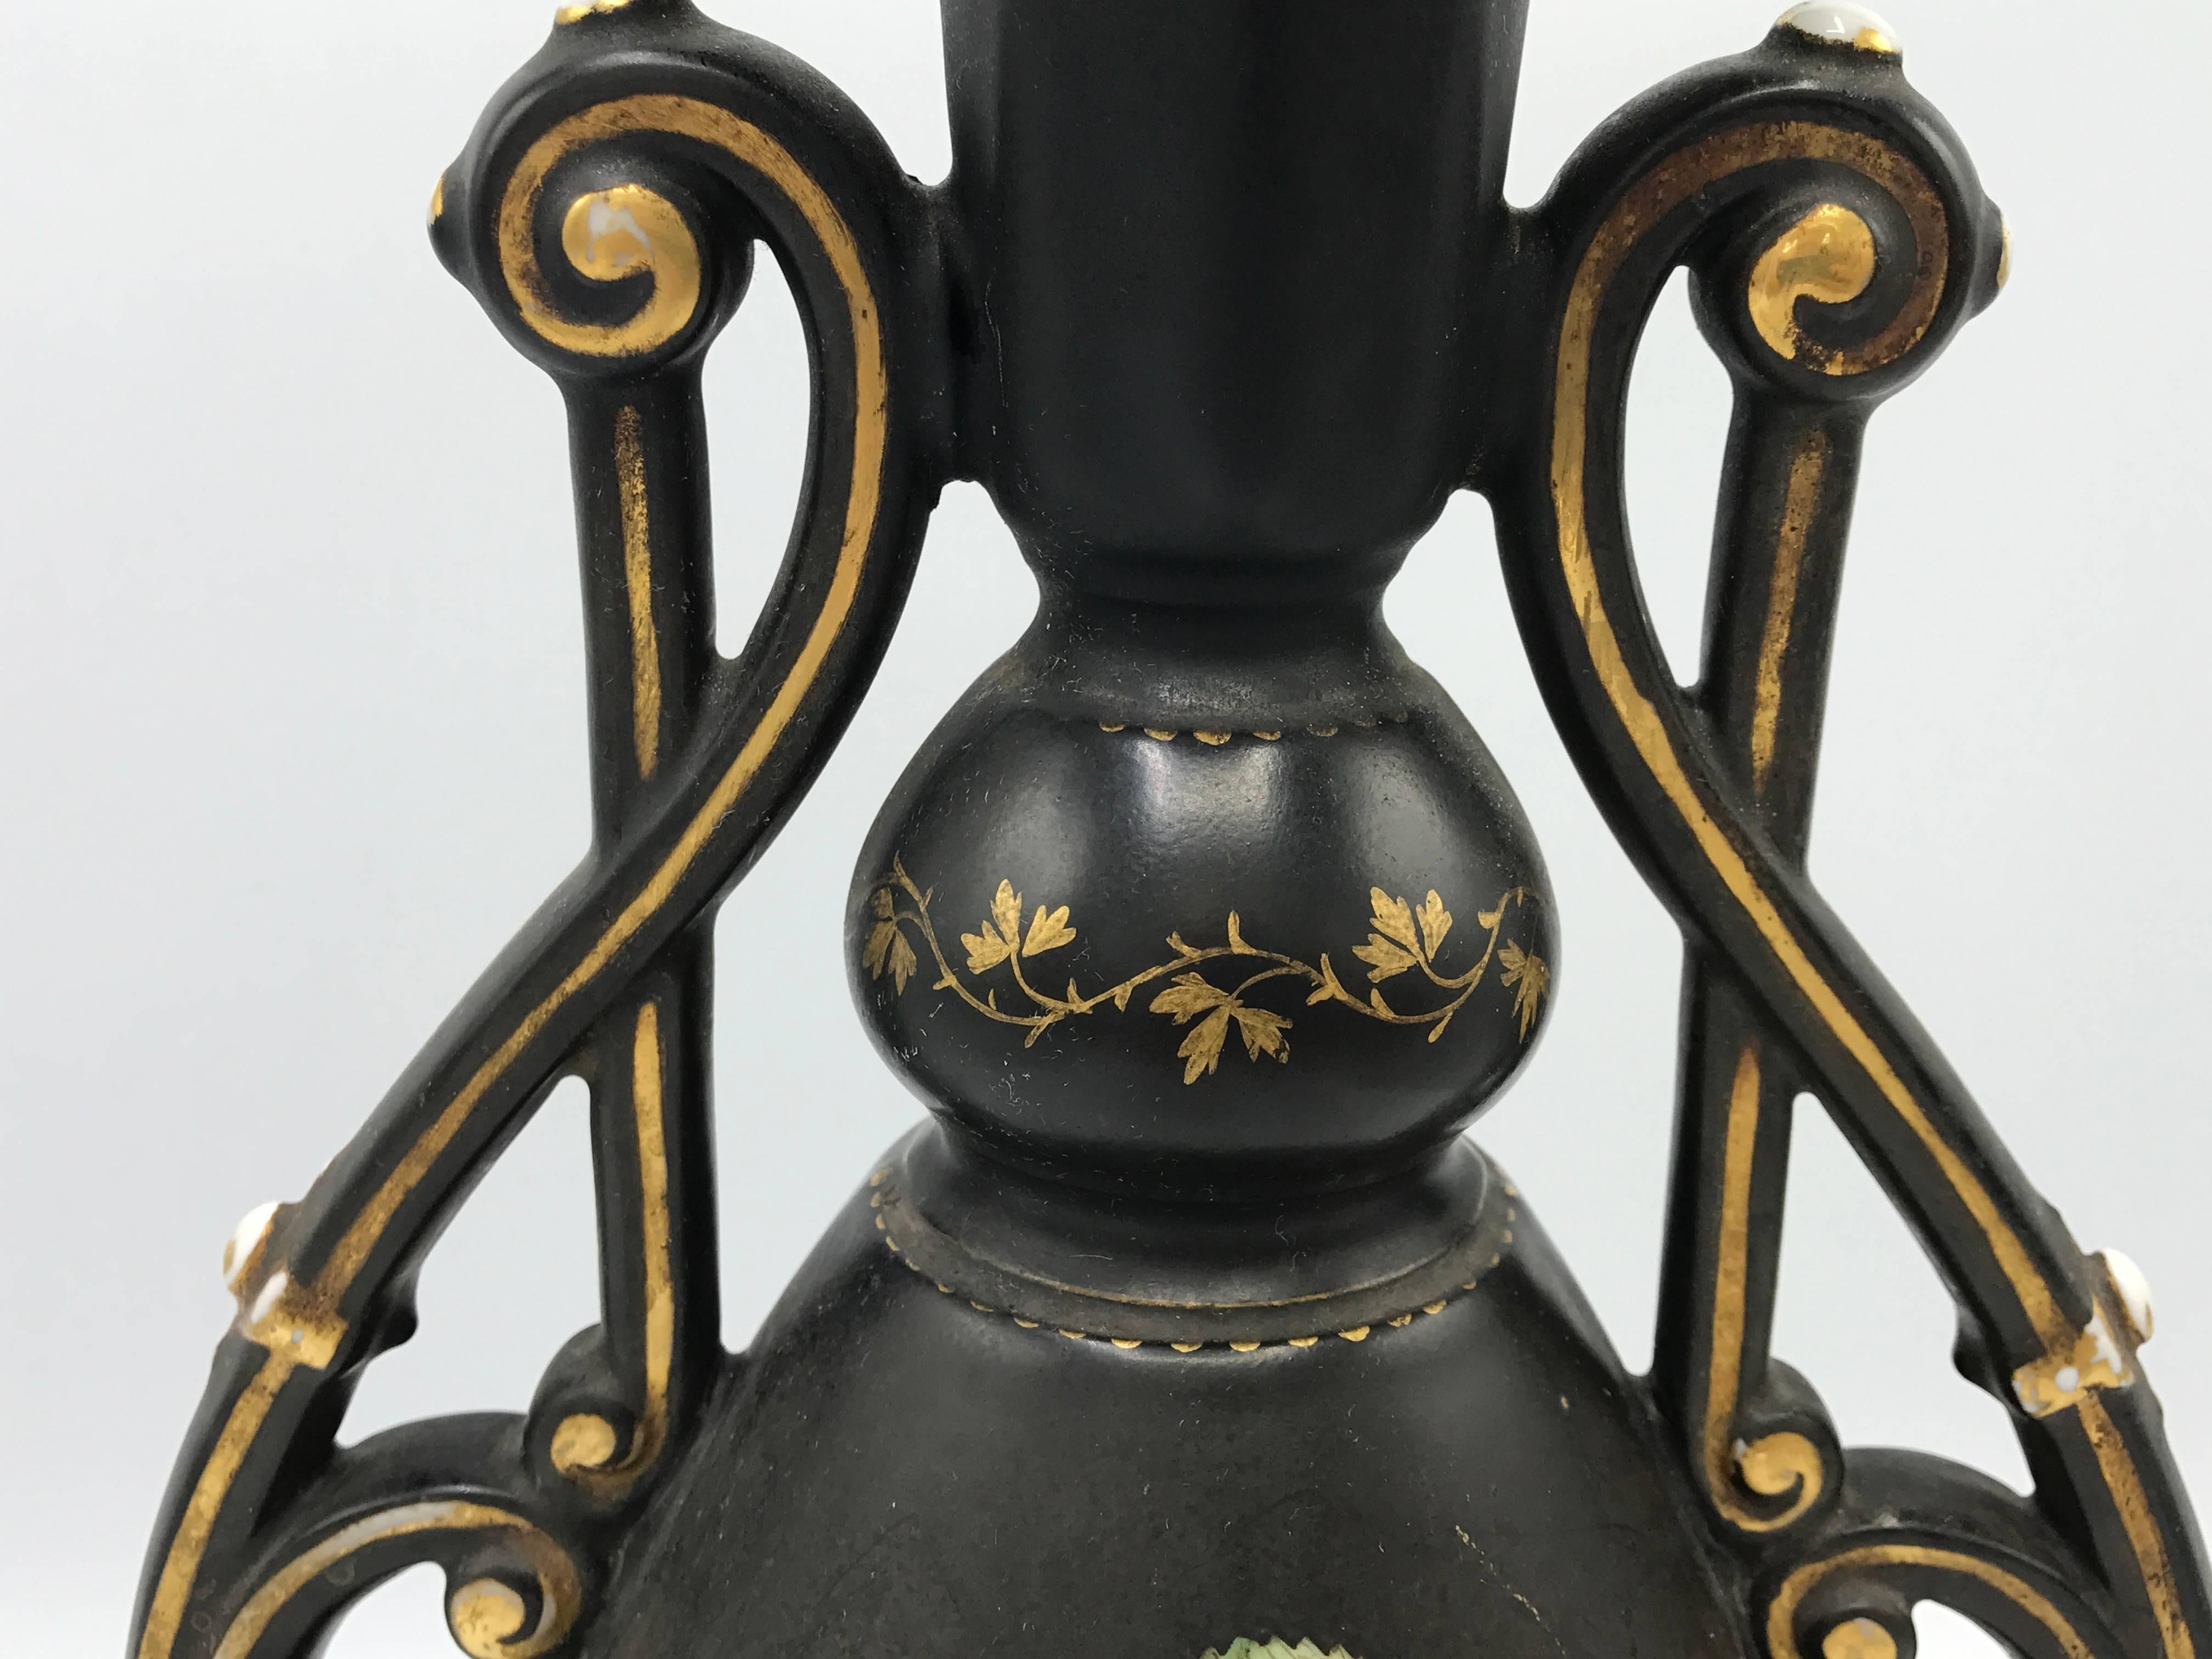 French Provincial 19th Century French Black and Gold Hand-Painted Vase with Handles